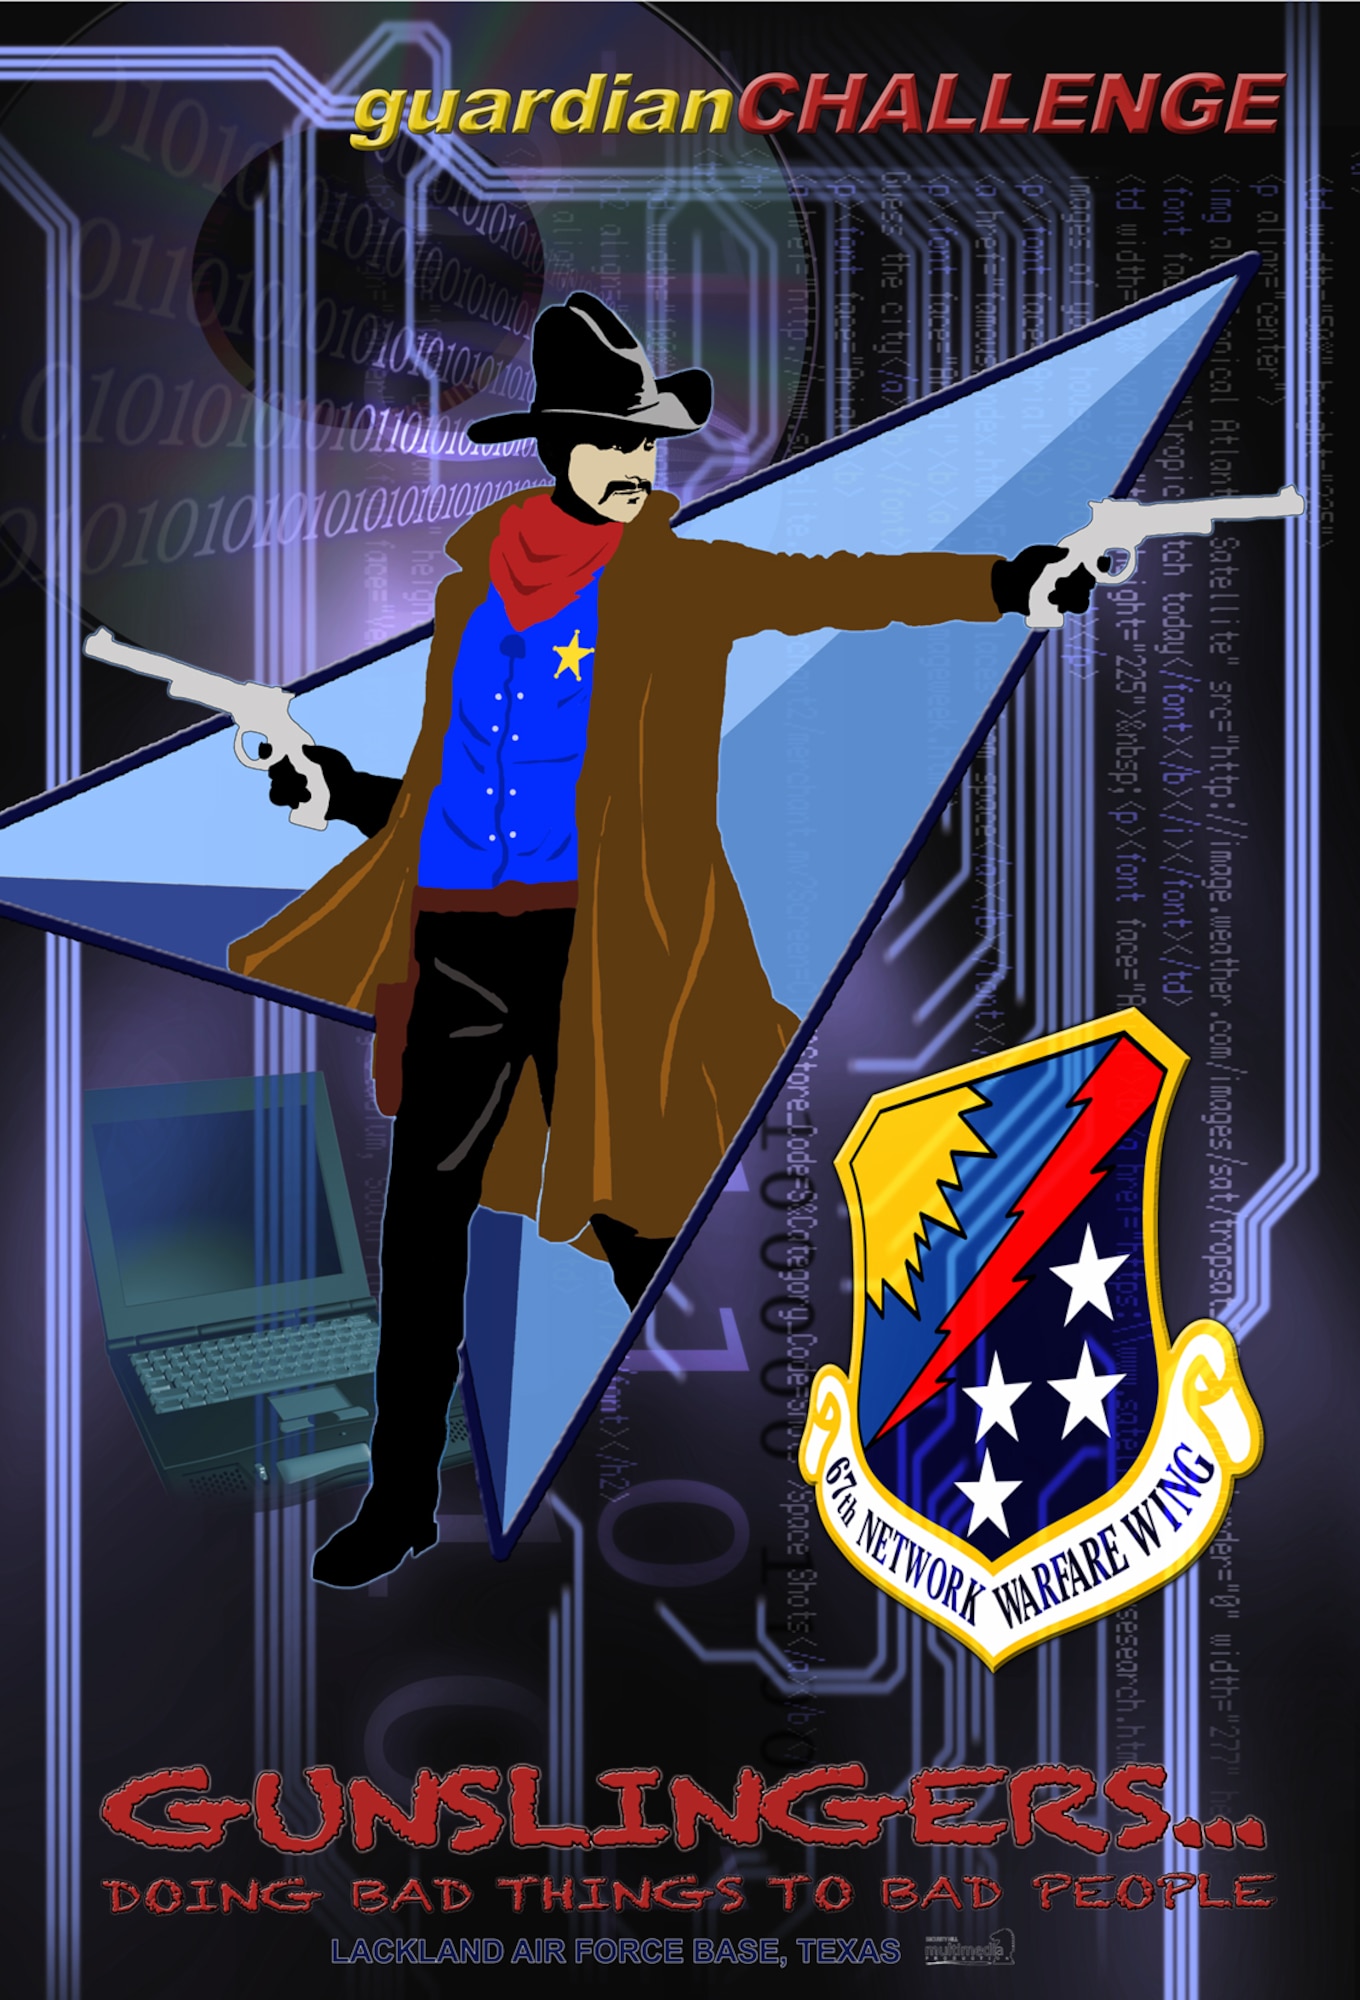 The 67th Network Warfare Wing Gunslinger is the wing's mascot. The Gunslinger represents the spirit and tenacity of the wing's personnel through his parallels with the wing shield: a star on his chest, like the shield stars, to represent the mission of network attack, exploitation, defense, and operations performed by cyberspace warriors to defeat adversaries; a dark blue shirt, like the dark blue field, to symbolize the shroud of secrecy that surrounds a cyberspace adversary; and a red scarf, the lightening bolt, to represent the applied speed, strength, power, and precision of Air Force network warfare. The Gunslinger's lifelong mission has been and will be to deny adversaries the use of cyberspace while maximizing Air Force use of the net: Lux Ex Tenebris (Light from Darkness). (U.S. Air Force Graphic/Vincent Childress)